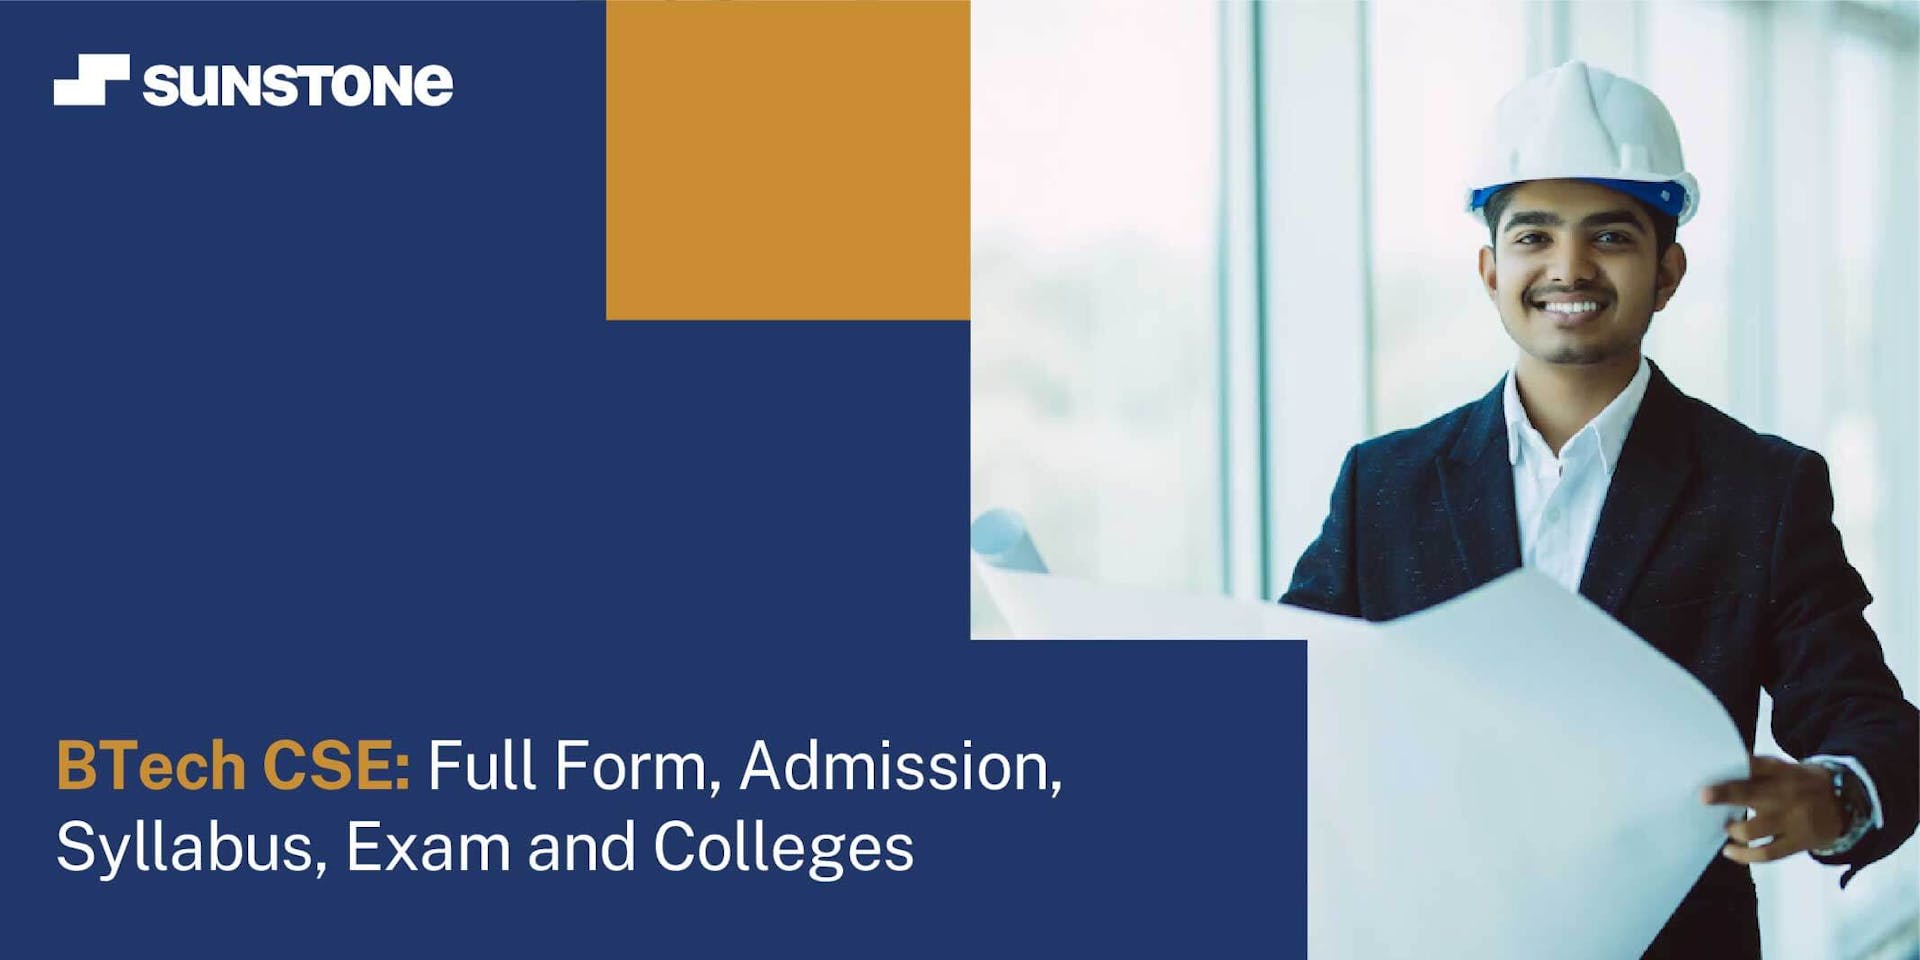 B.Tech CSE admission, syllabus, exam and colleges